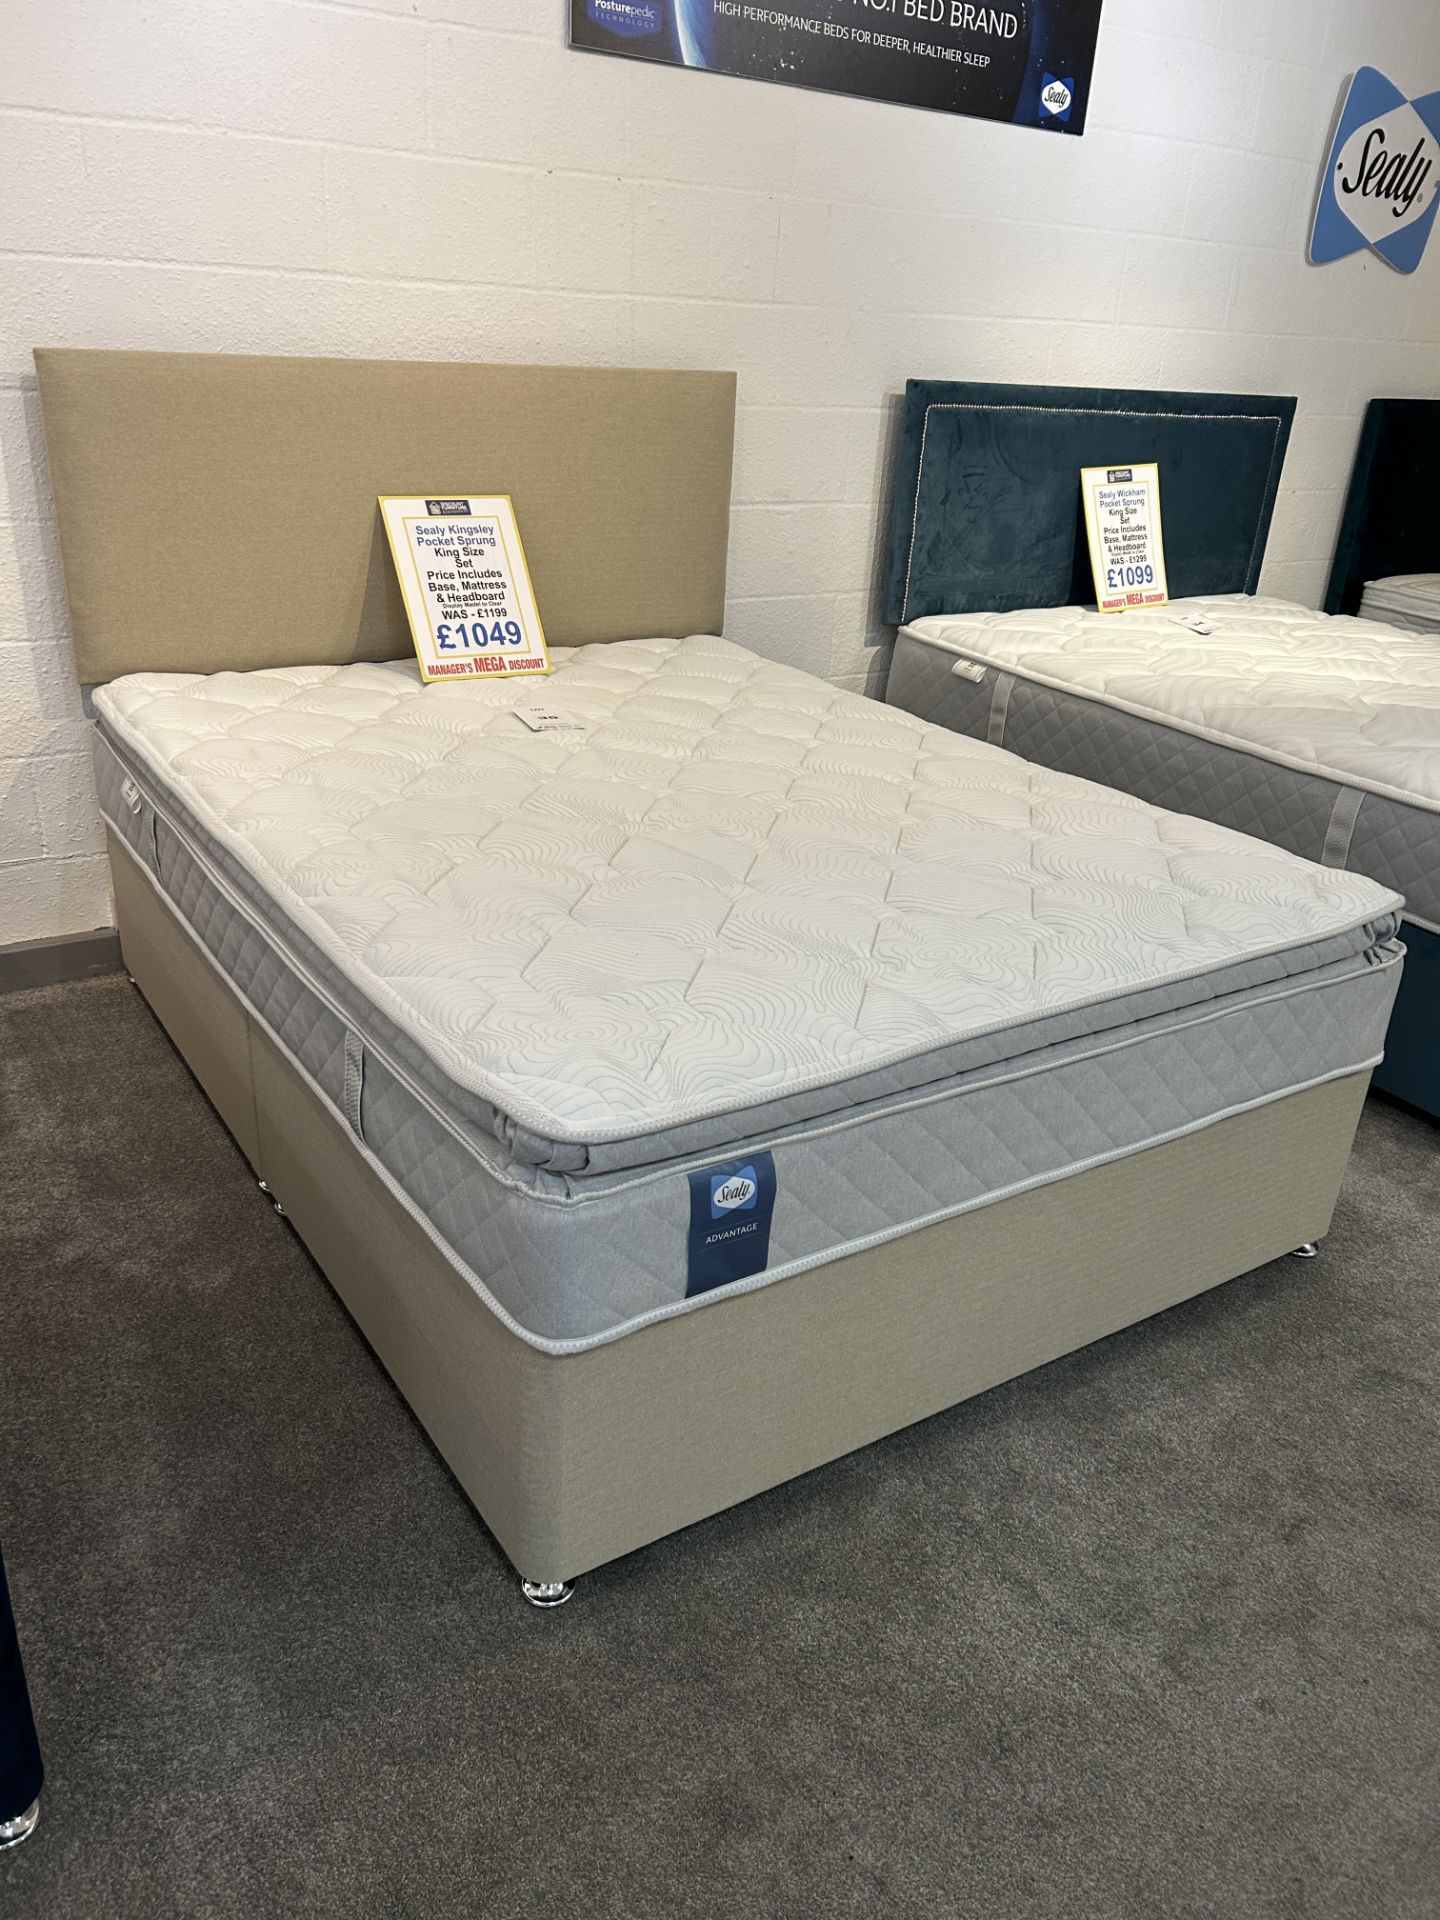 Ex-Display King Size Bed Set incl: Sealy Kingsley Mattress, Base & Headboard | RRP £1,199 - Image 2 of 3